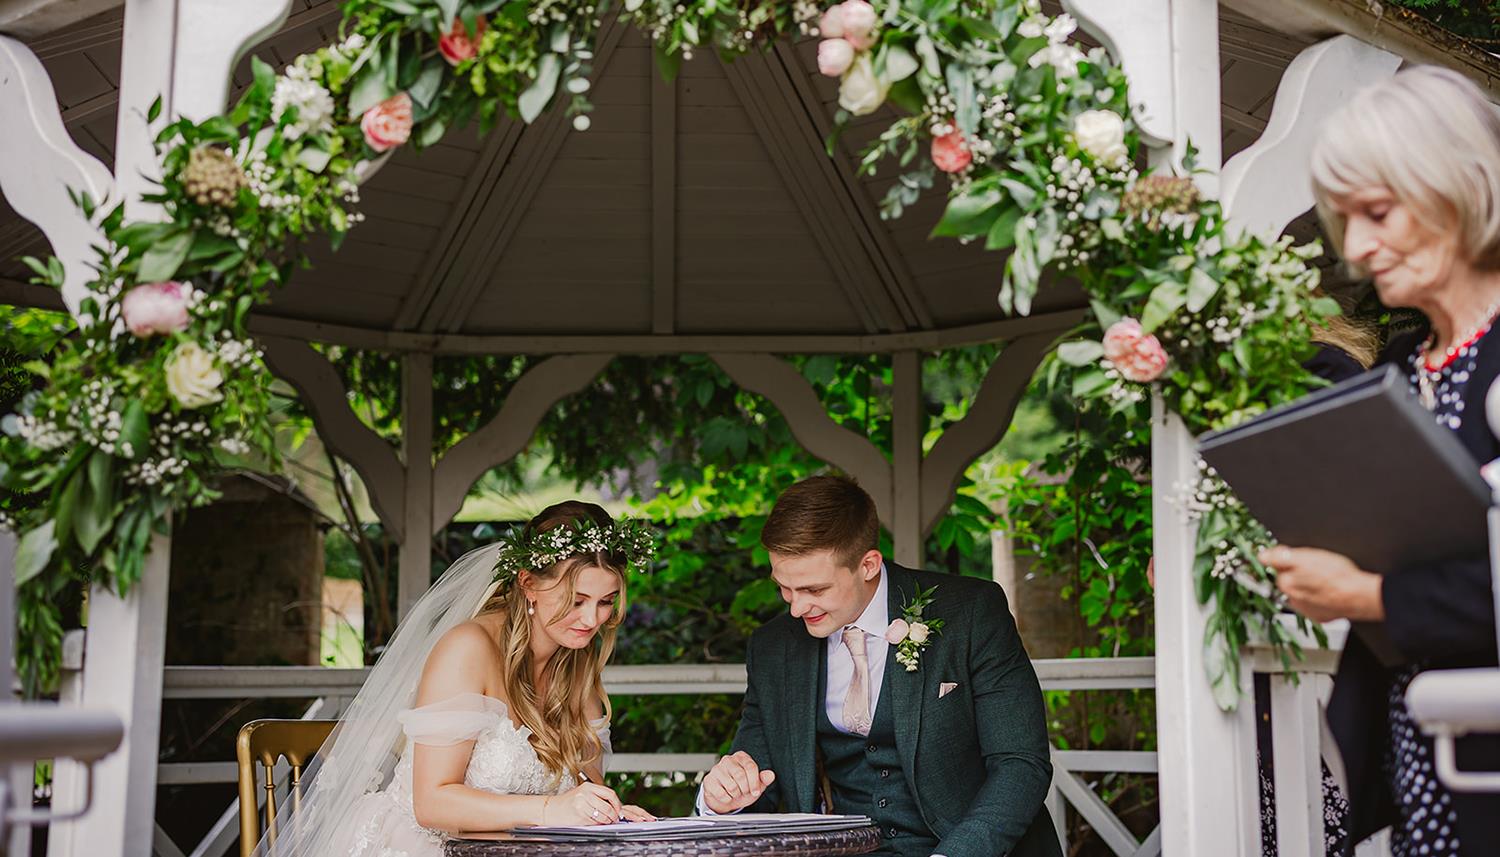 Signing the register. Photo Credit: Philip Quinnell Photography